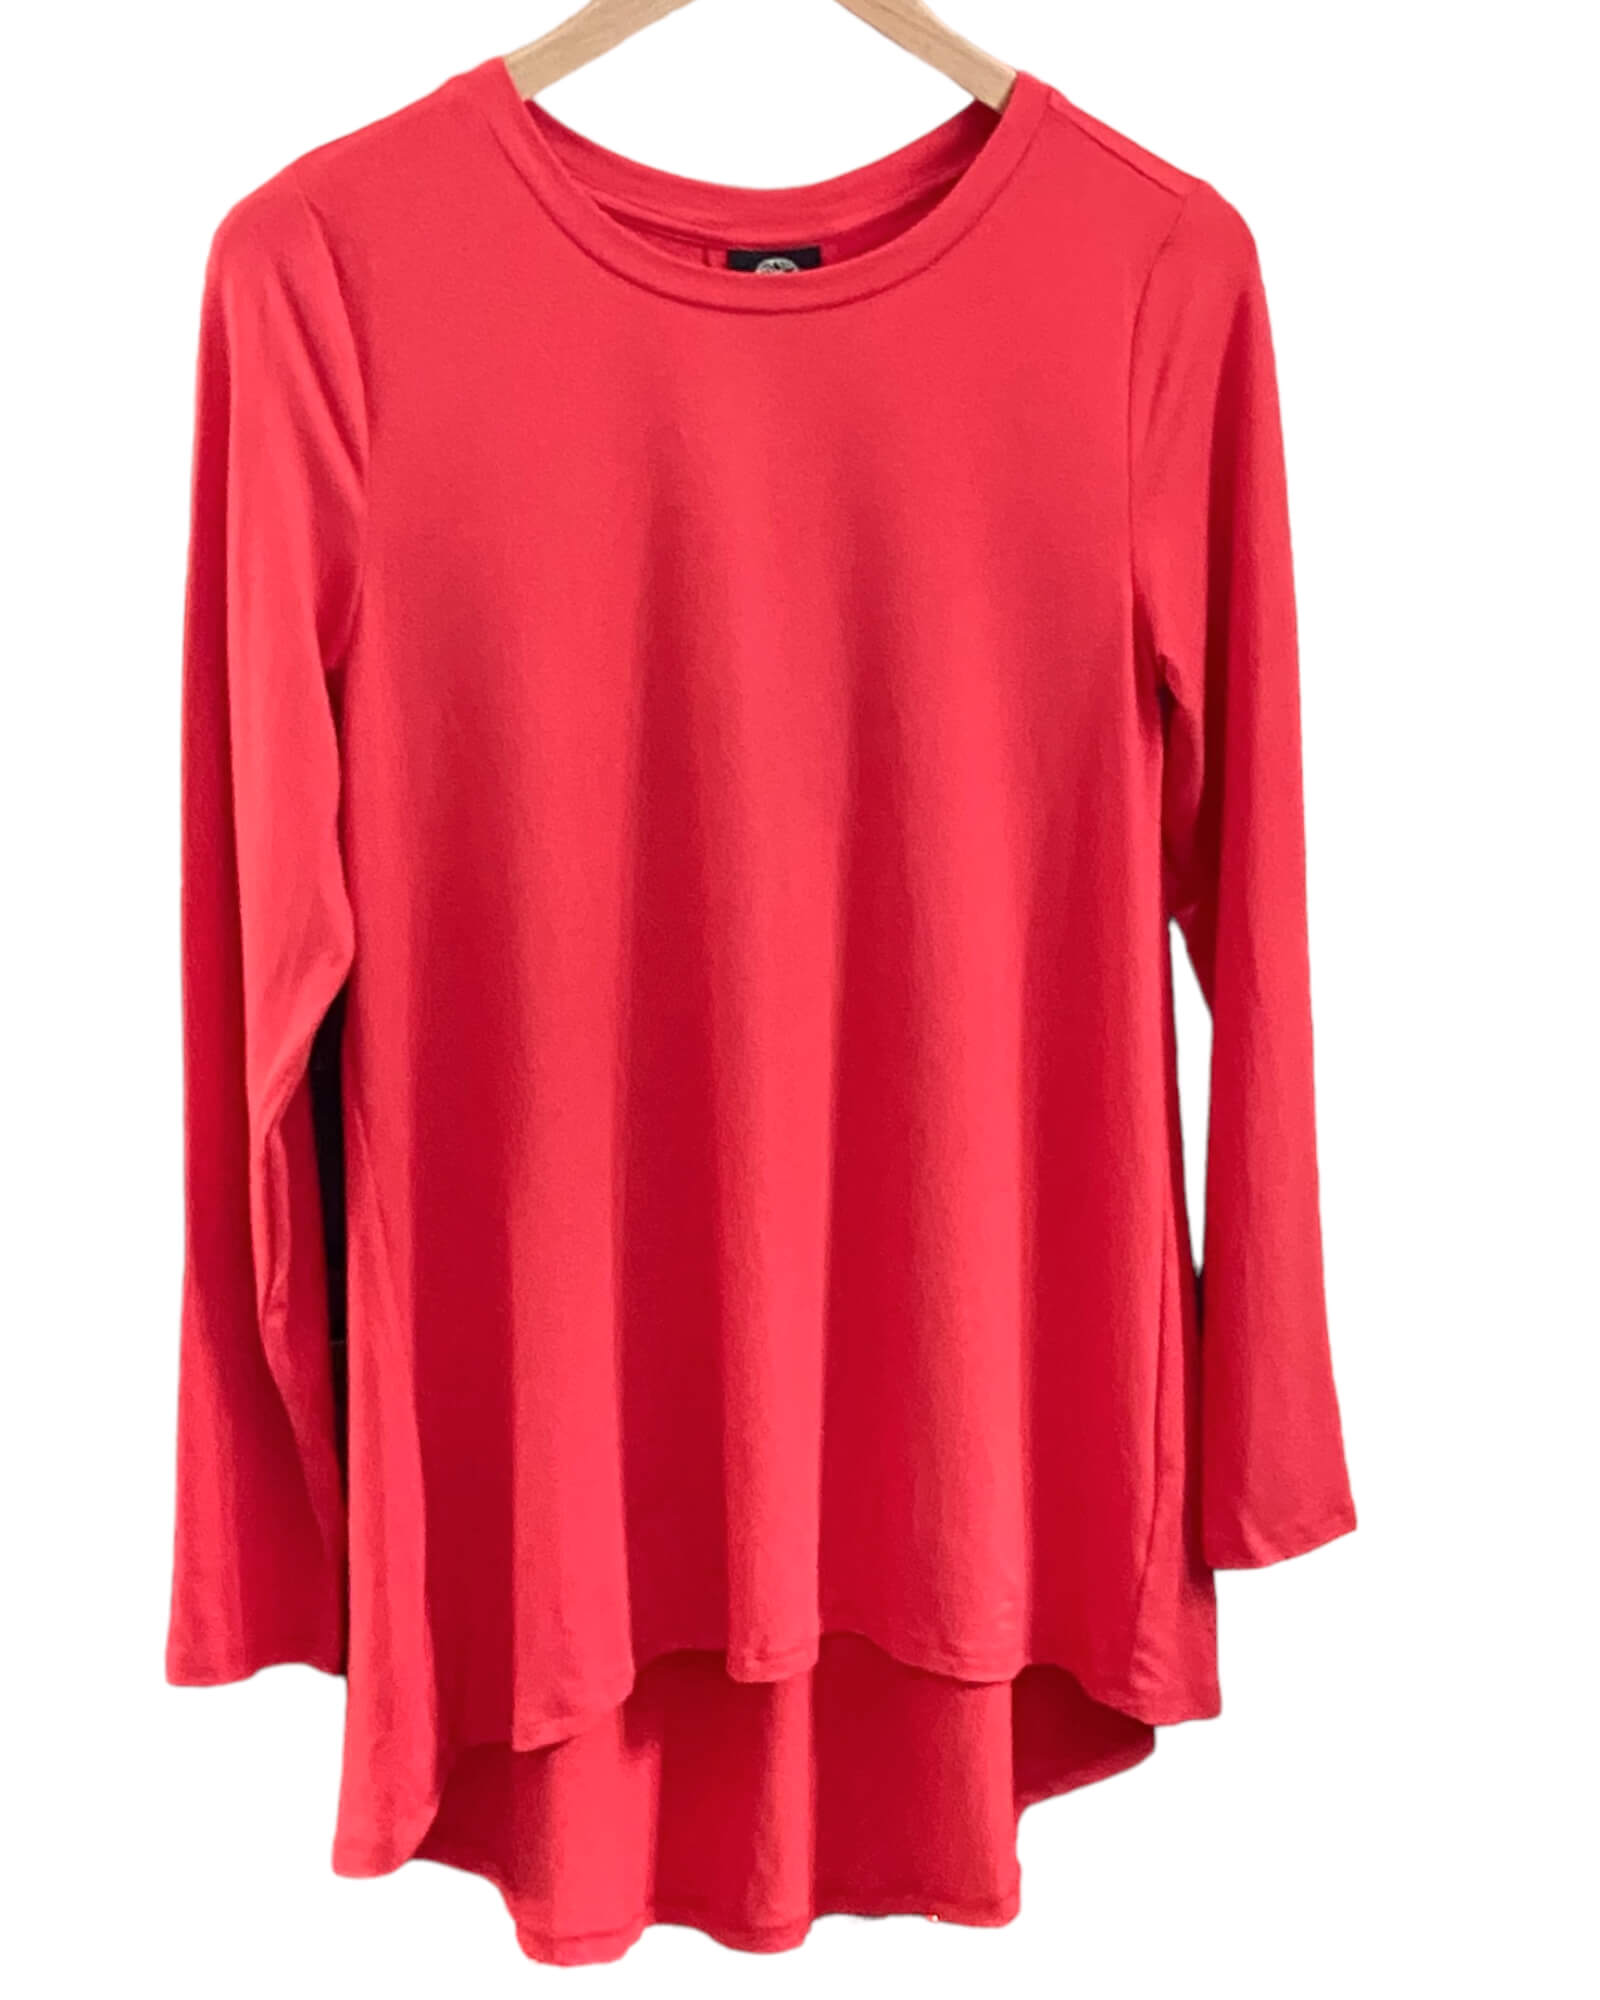 Warm Spring BOBEAU red hibiscus swing jersey knit top